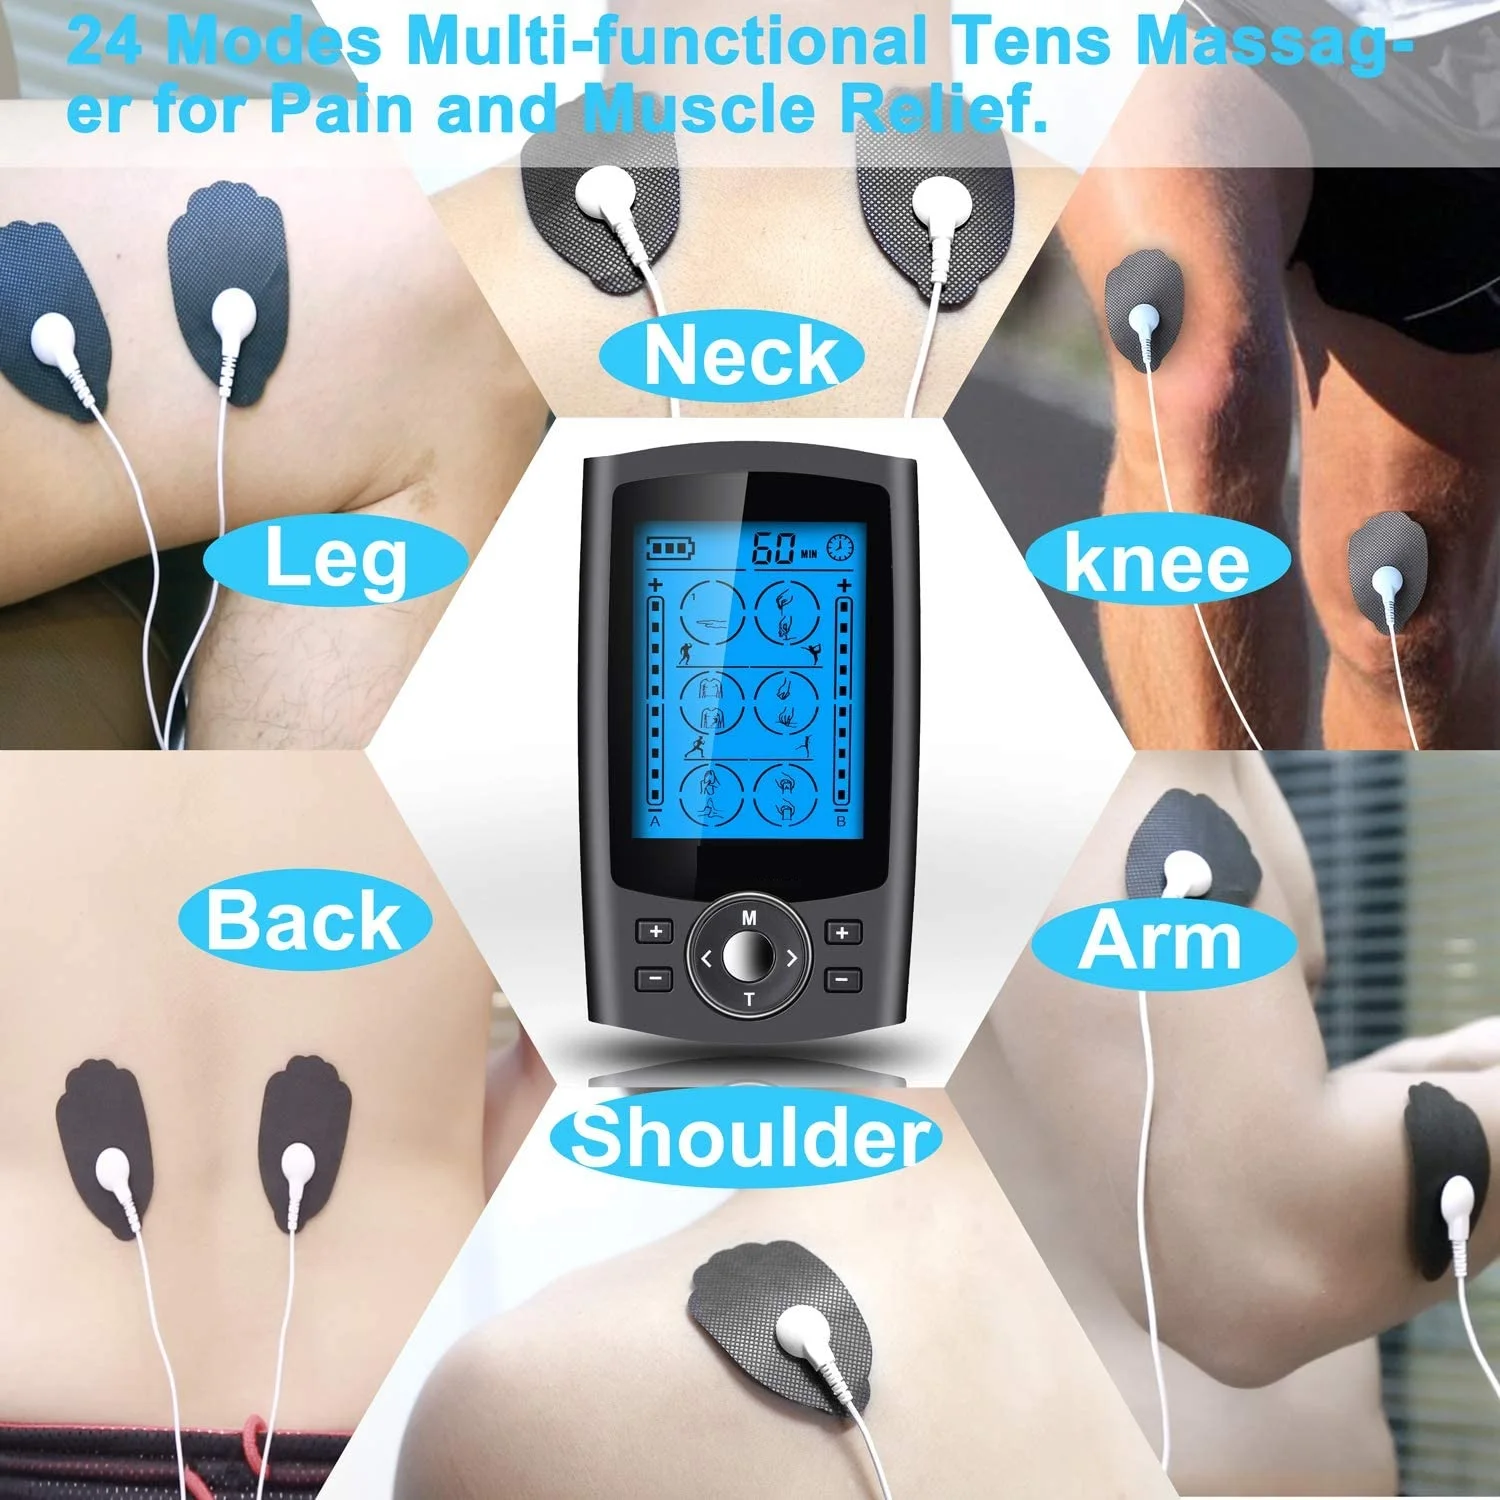 Belifu Dual Channel TENS EMS Unit 24 Modes Muscle Stimulator for Pain  Relief Therapy, Electronic Pulse Massager Muscle Massager with 10 Pads,  Dust-Proof Drawstring Storage Bag 